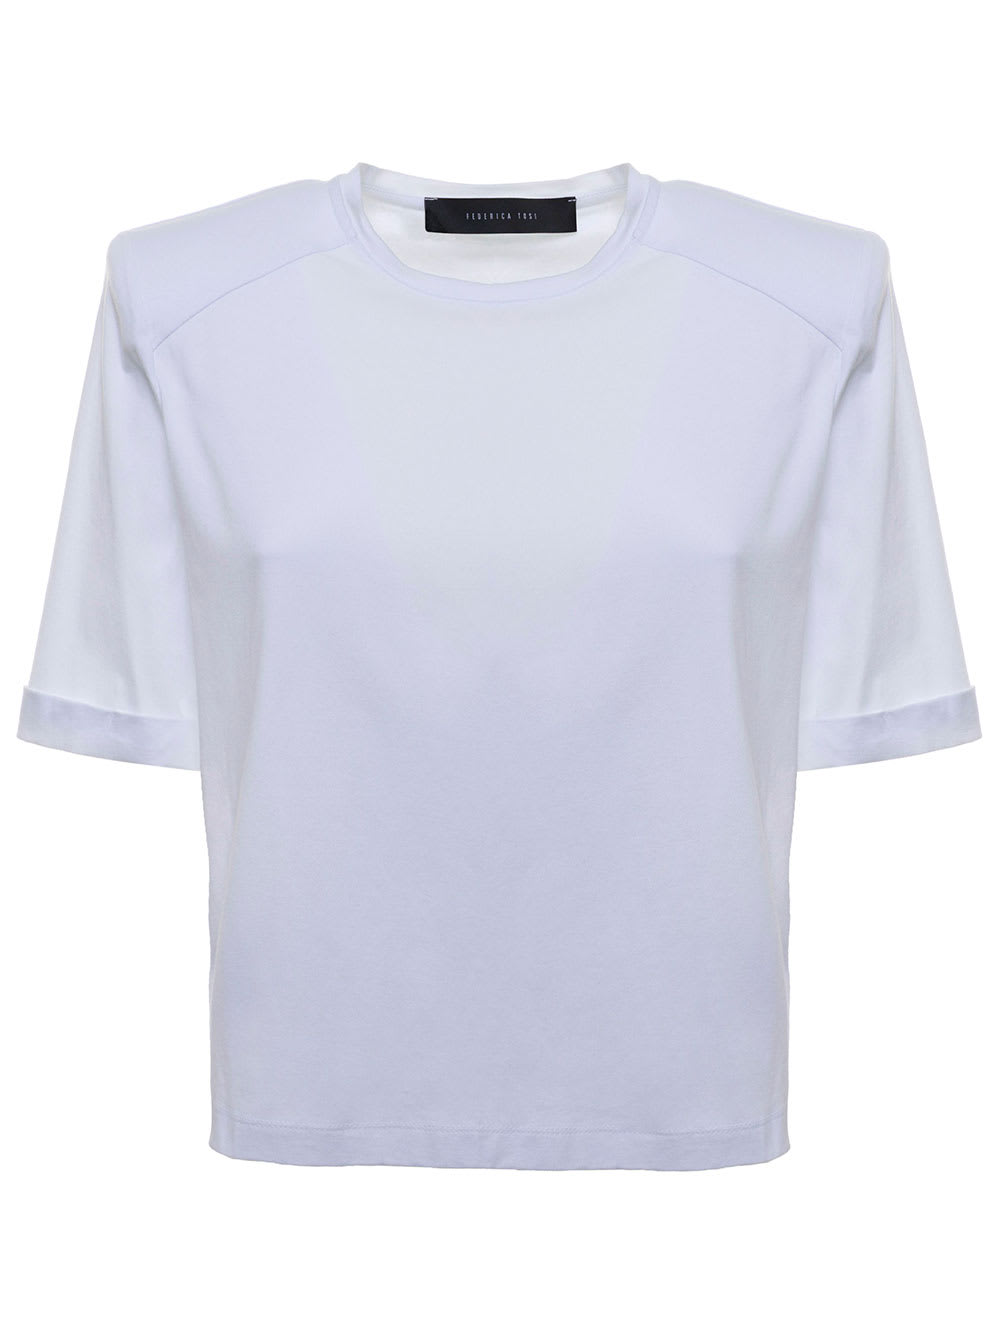 Federica Tosi White Cotton T-shirt With Padded Straps